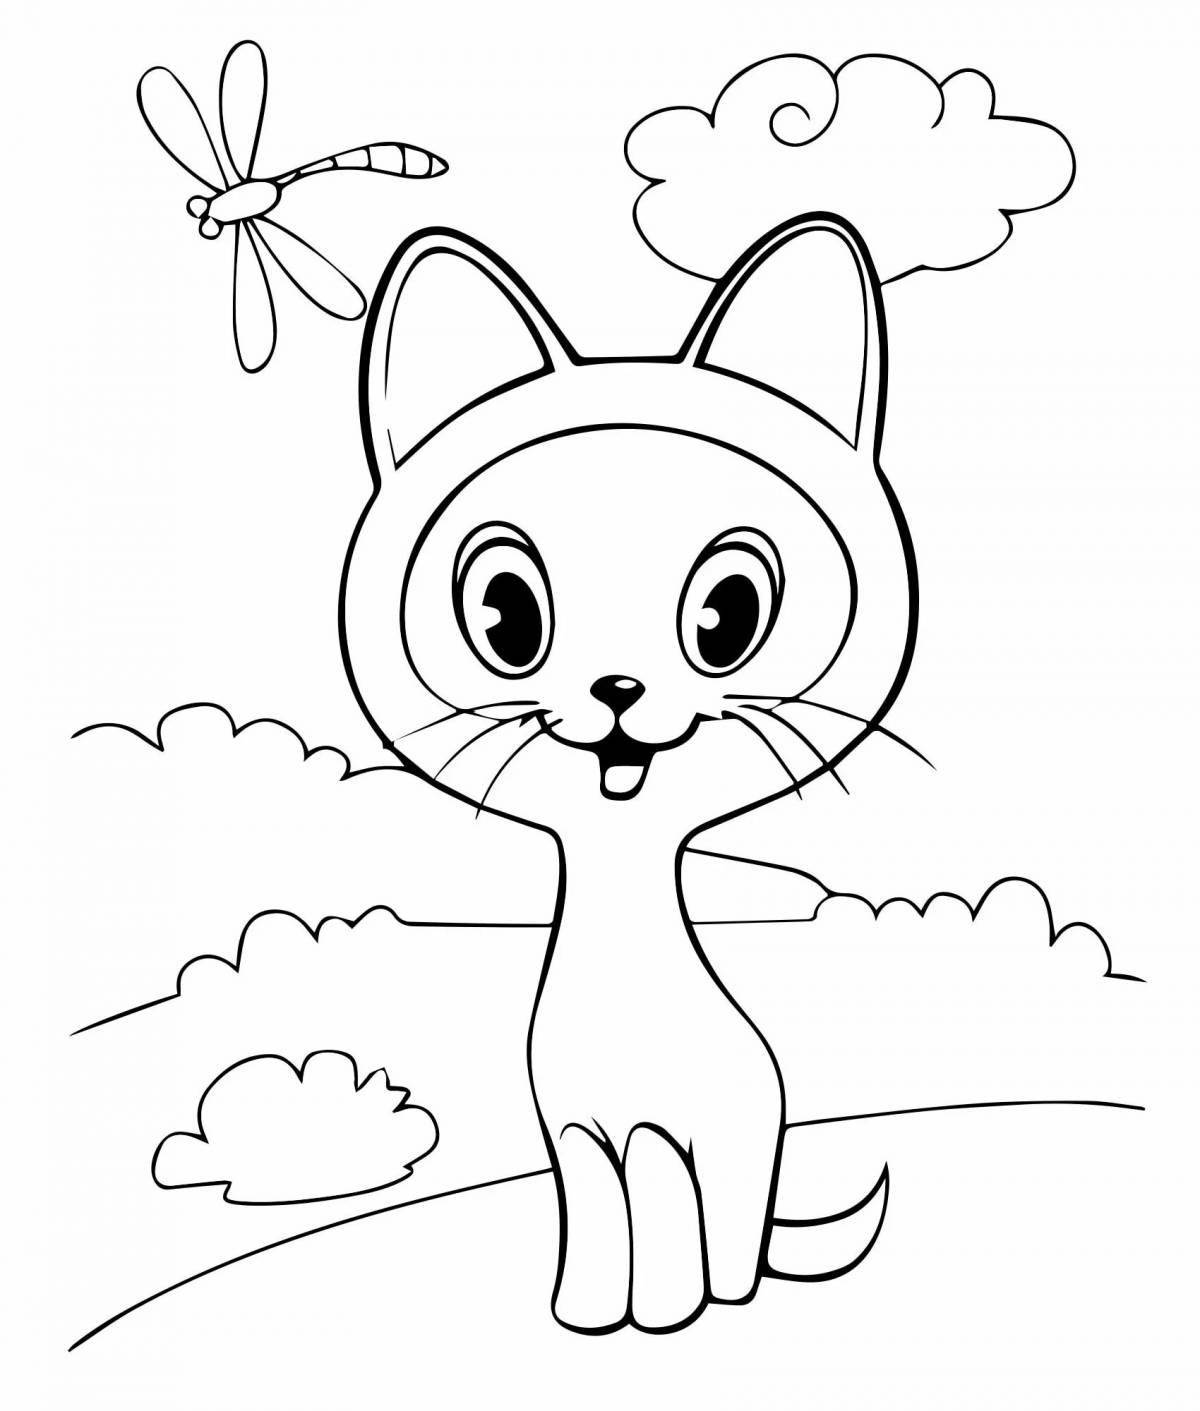 Amazing cartoon cat coloring pages